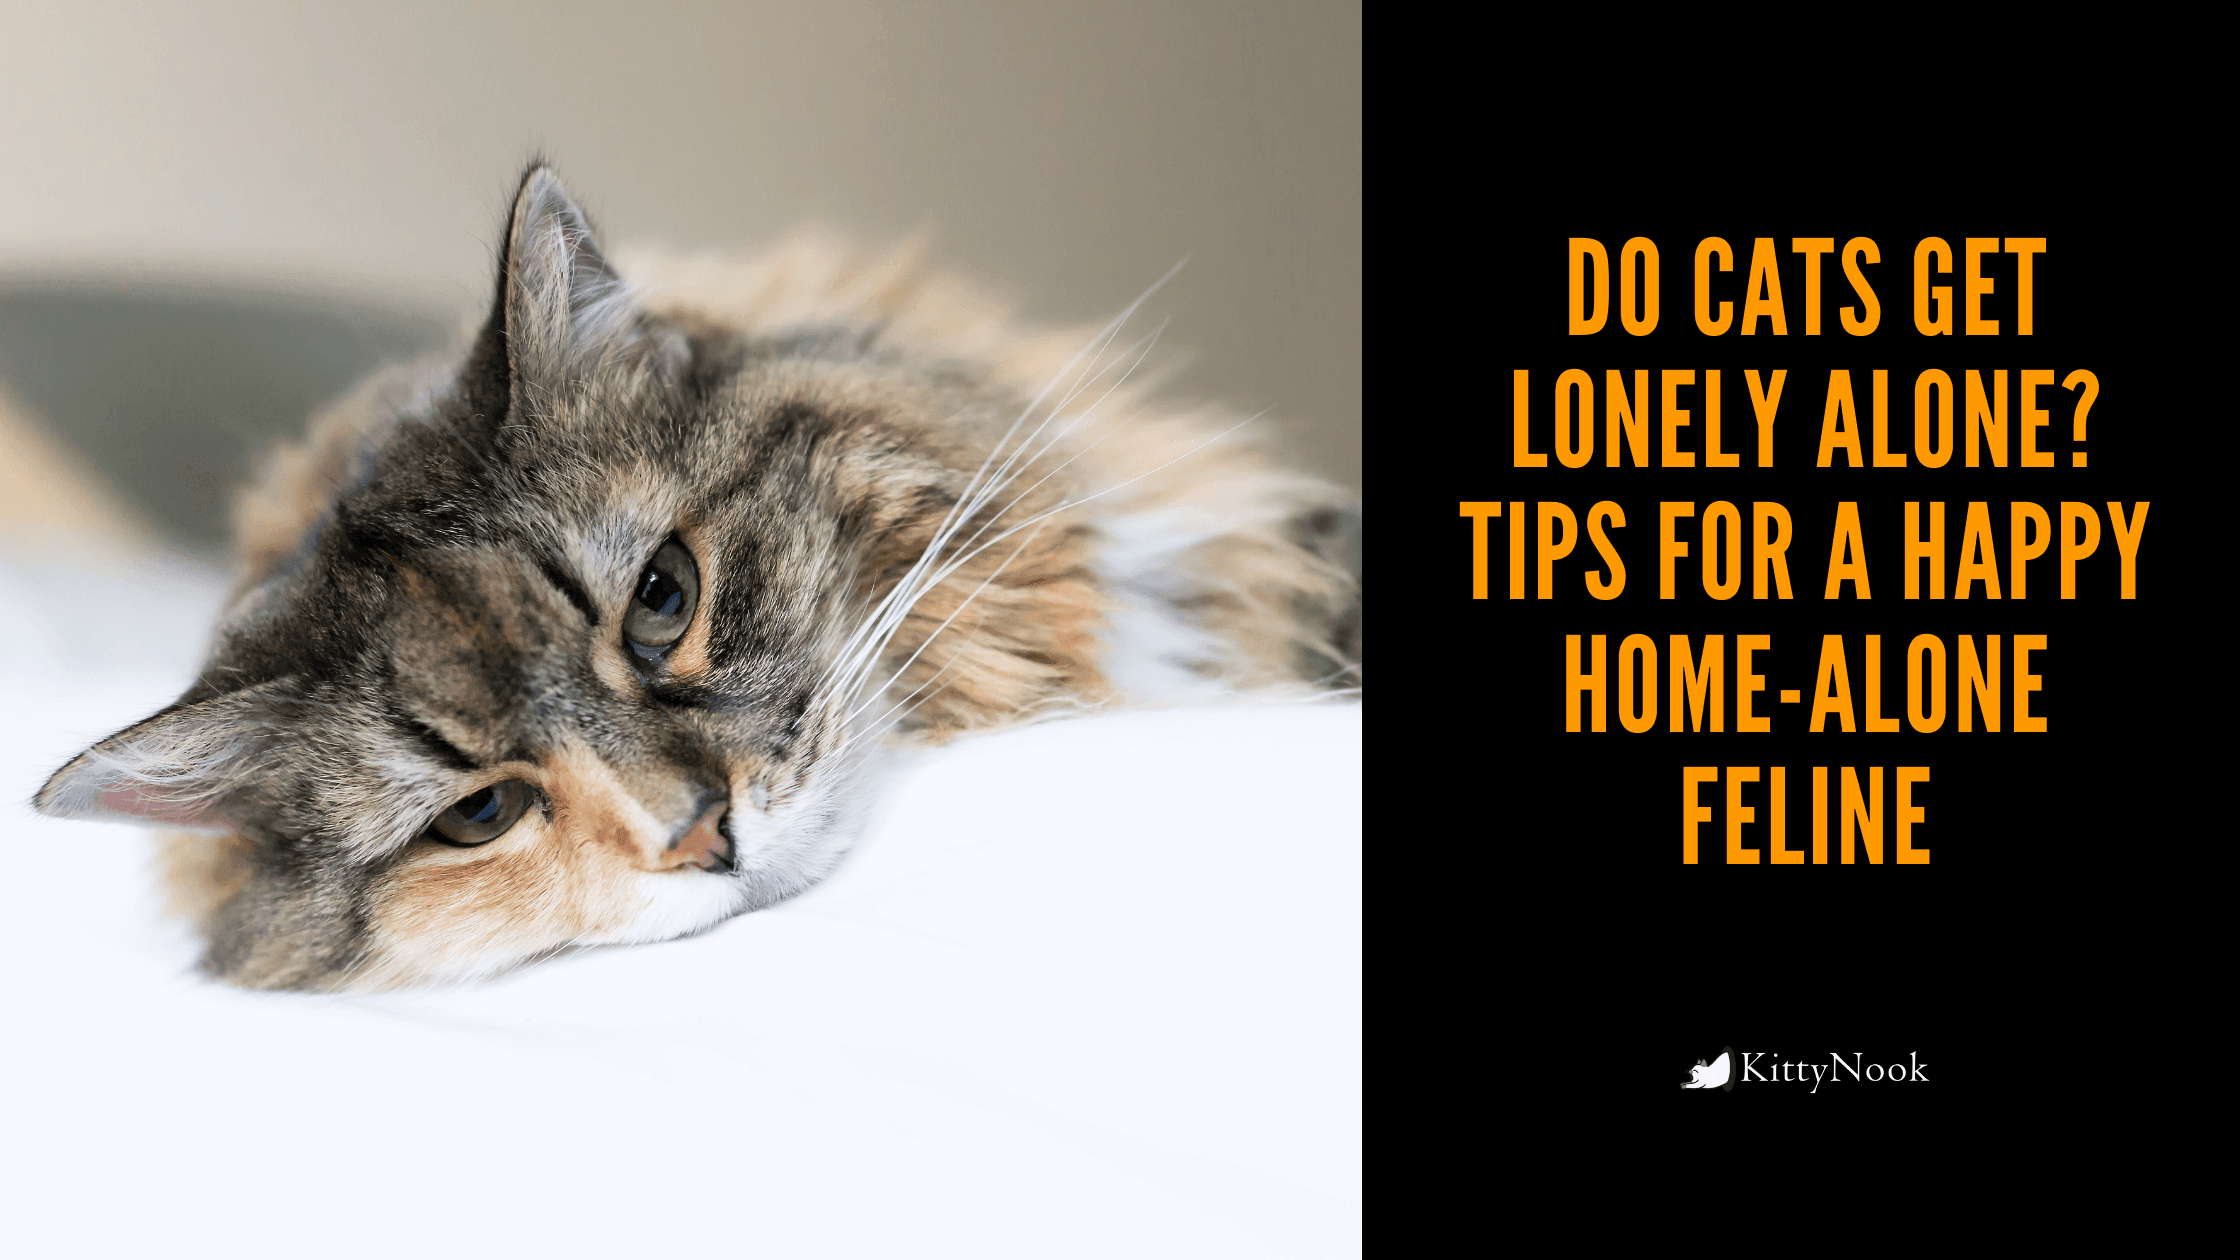 Do Cats Get Lonely Alone? Tips for a Happy Home-Alone Feline - KittyNook